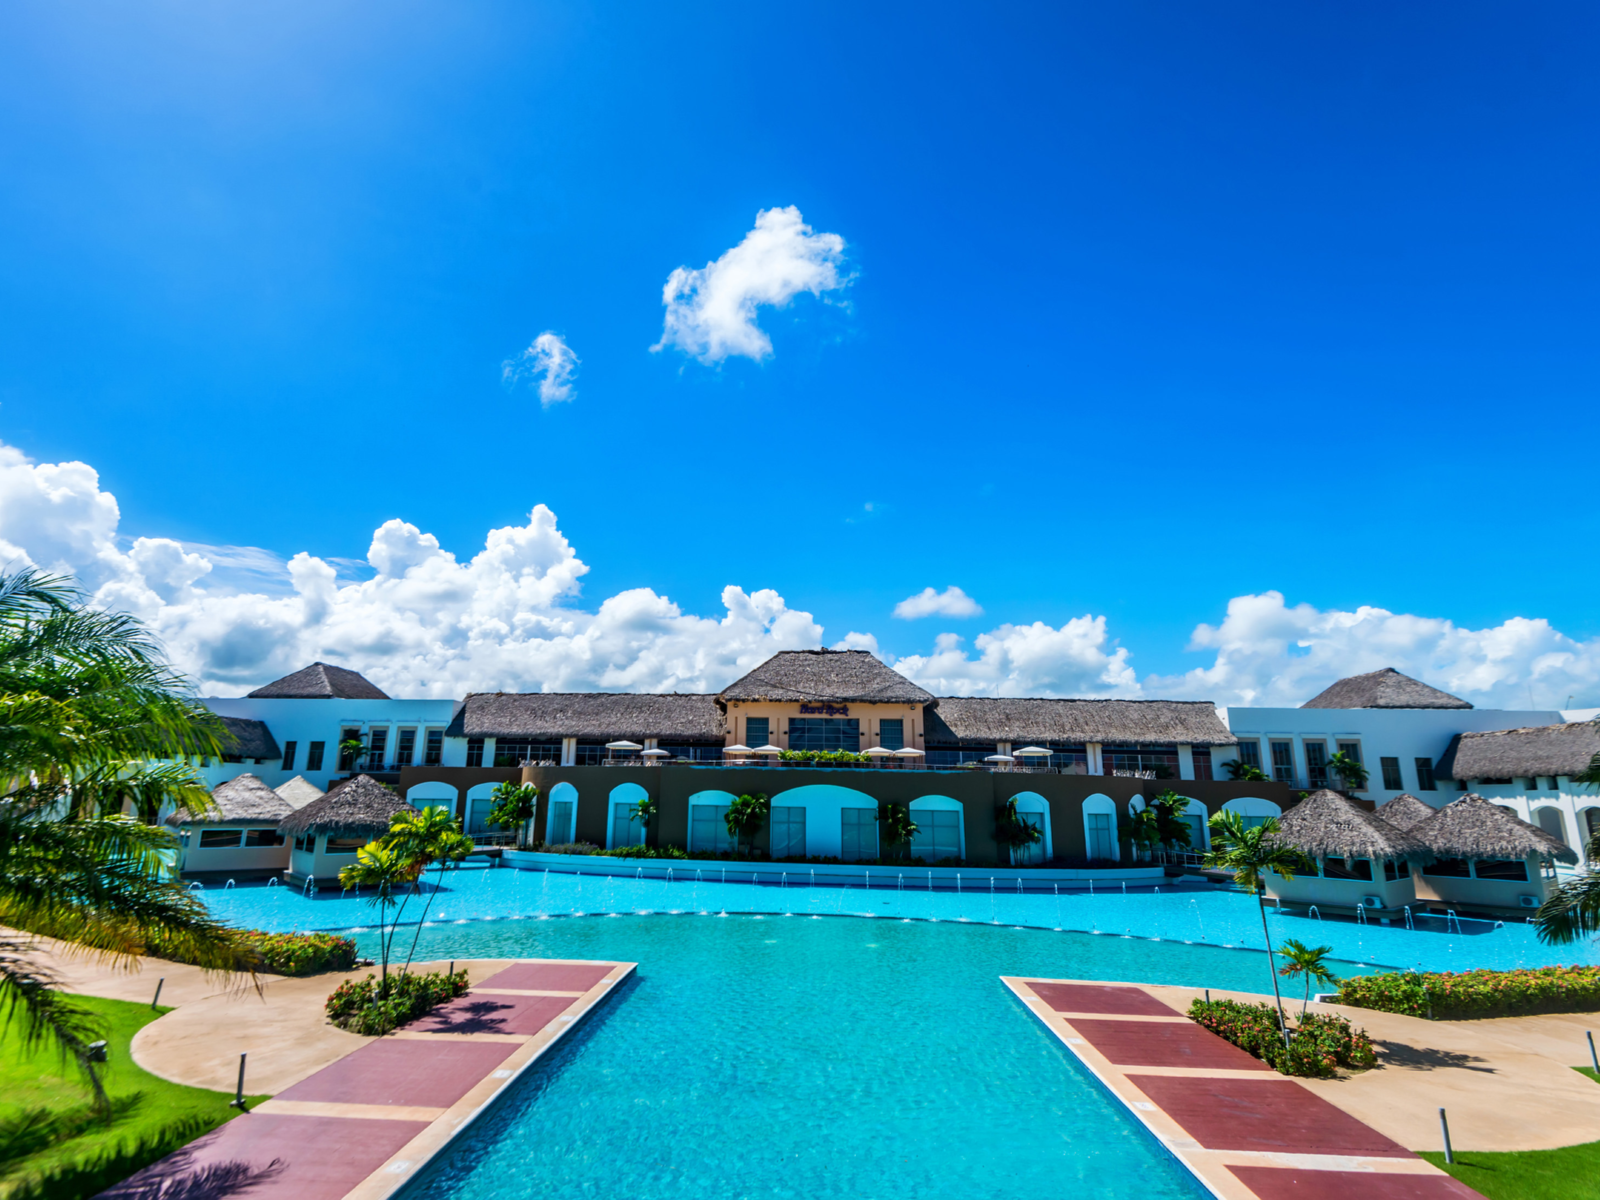 A bright day over the vast pool area at Hard Rock Hotel and Casino Punta Cana, one of the best all-inclusive resorts in Punta Cana